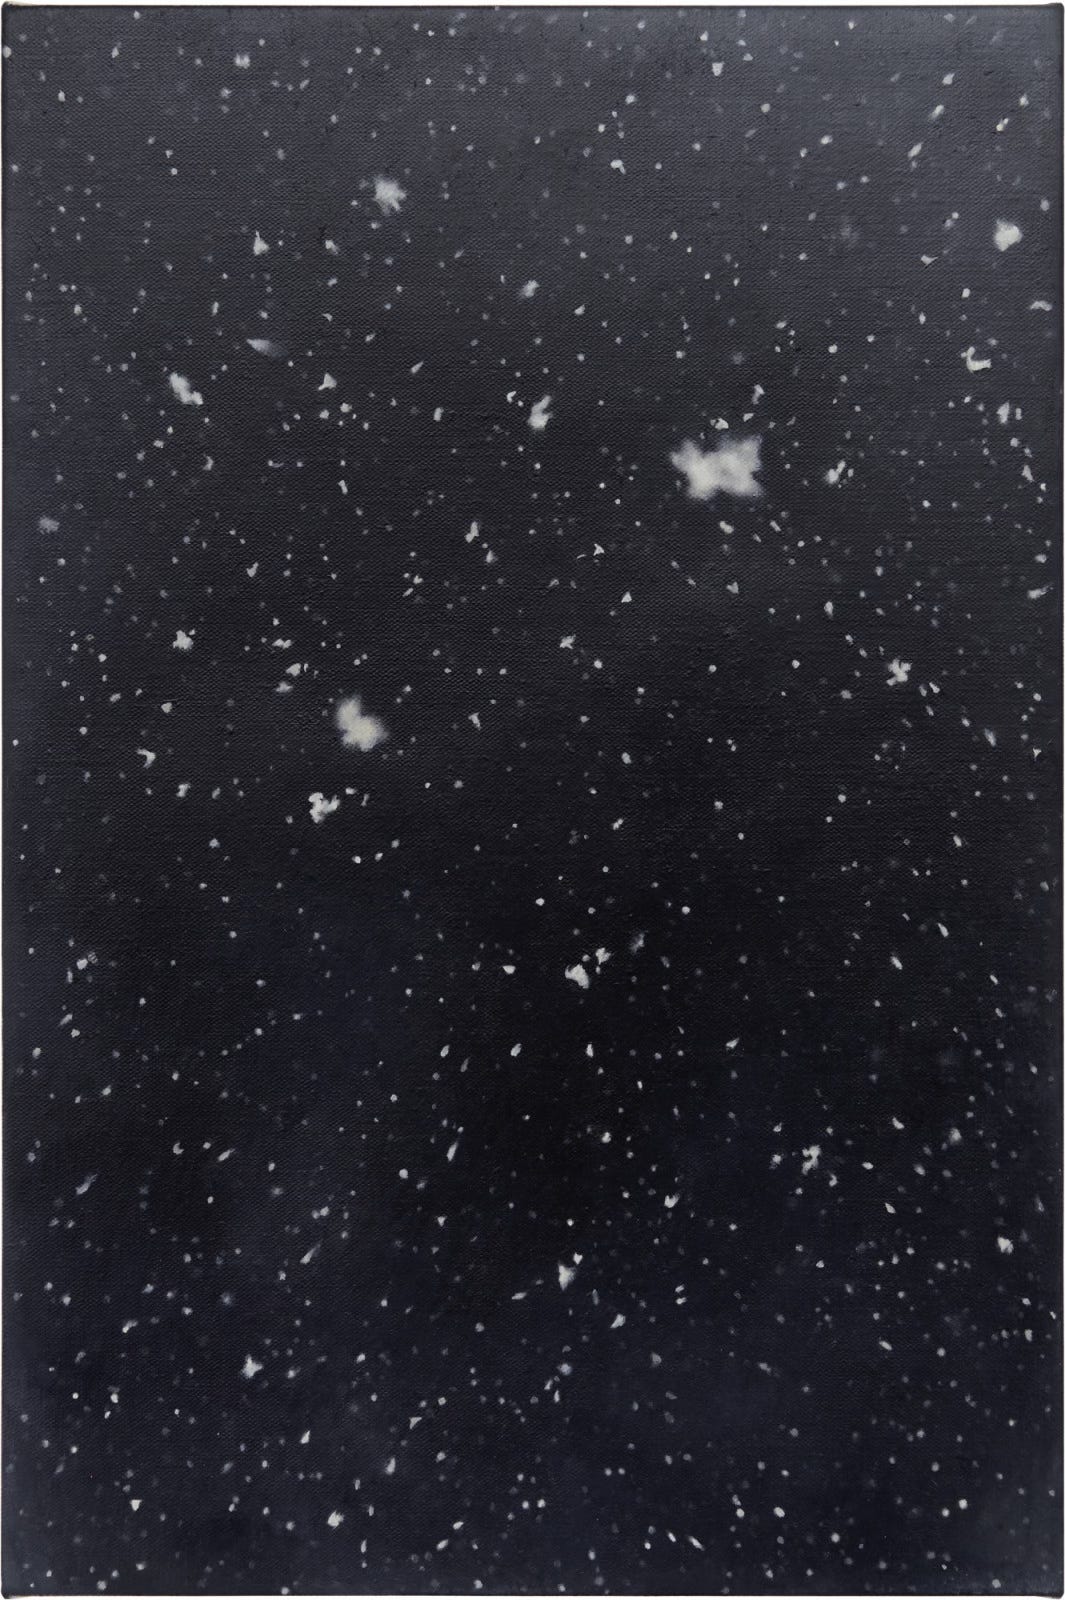 The painting Snowfall (Coat) by Vija Celmins. A field of black with many white dots: some tiny and sharp, as if in perfect focus, others are larger and blurred as if too close to the camera. The sensation is of snow falling from a night sky but the painting is described by the gallery as snow accumulating on a black coat.